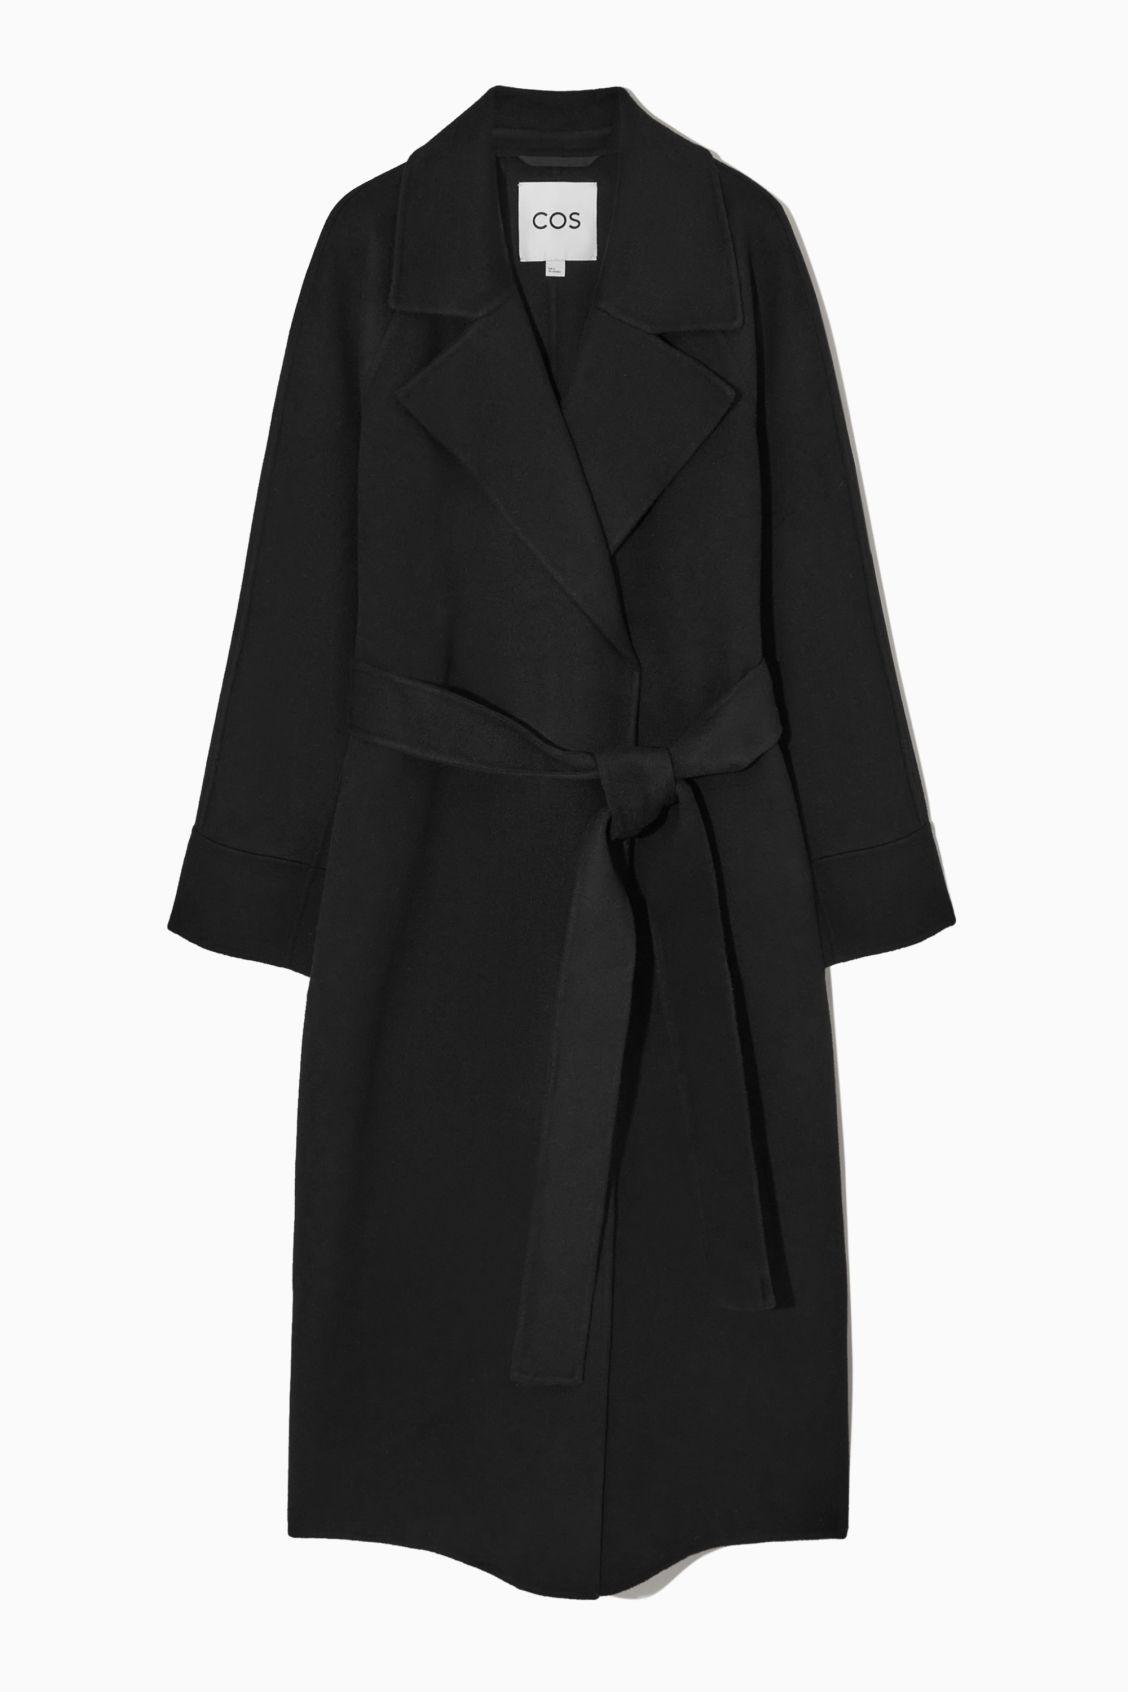 COS Double-faced Wool Belted Coat in Black | Lyst